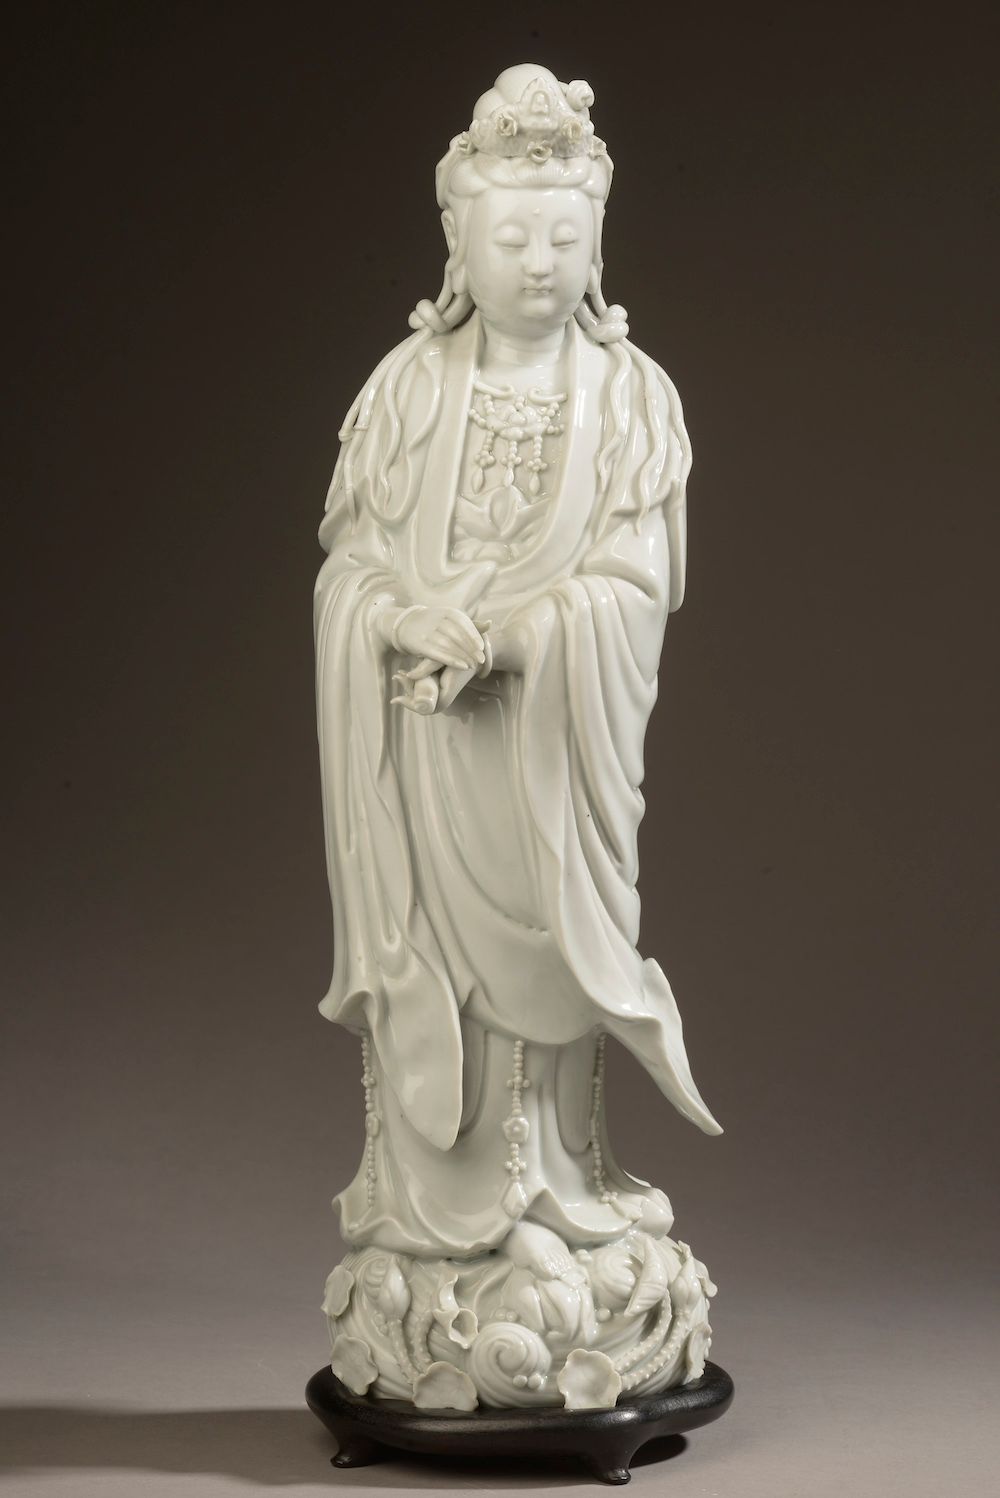 Null CHINA - 20th century.

A large statuette of a standing Guanyin in white ena&hellip;